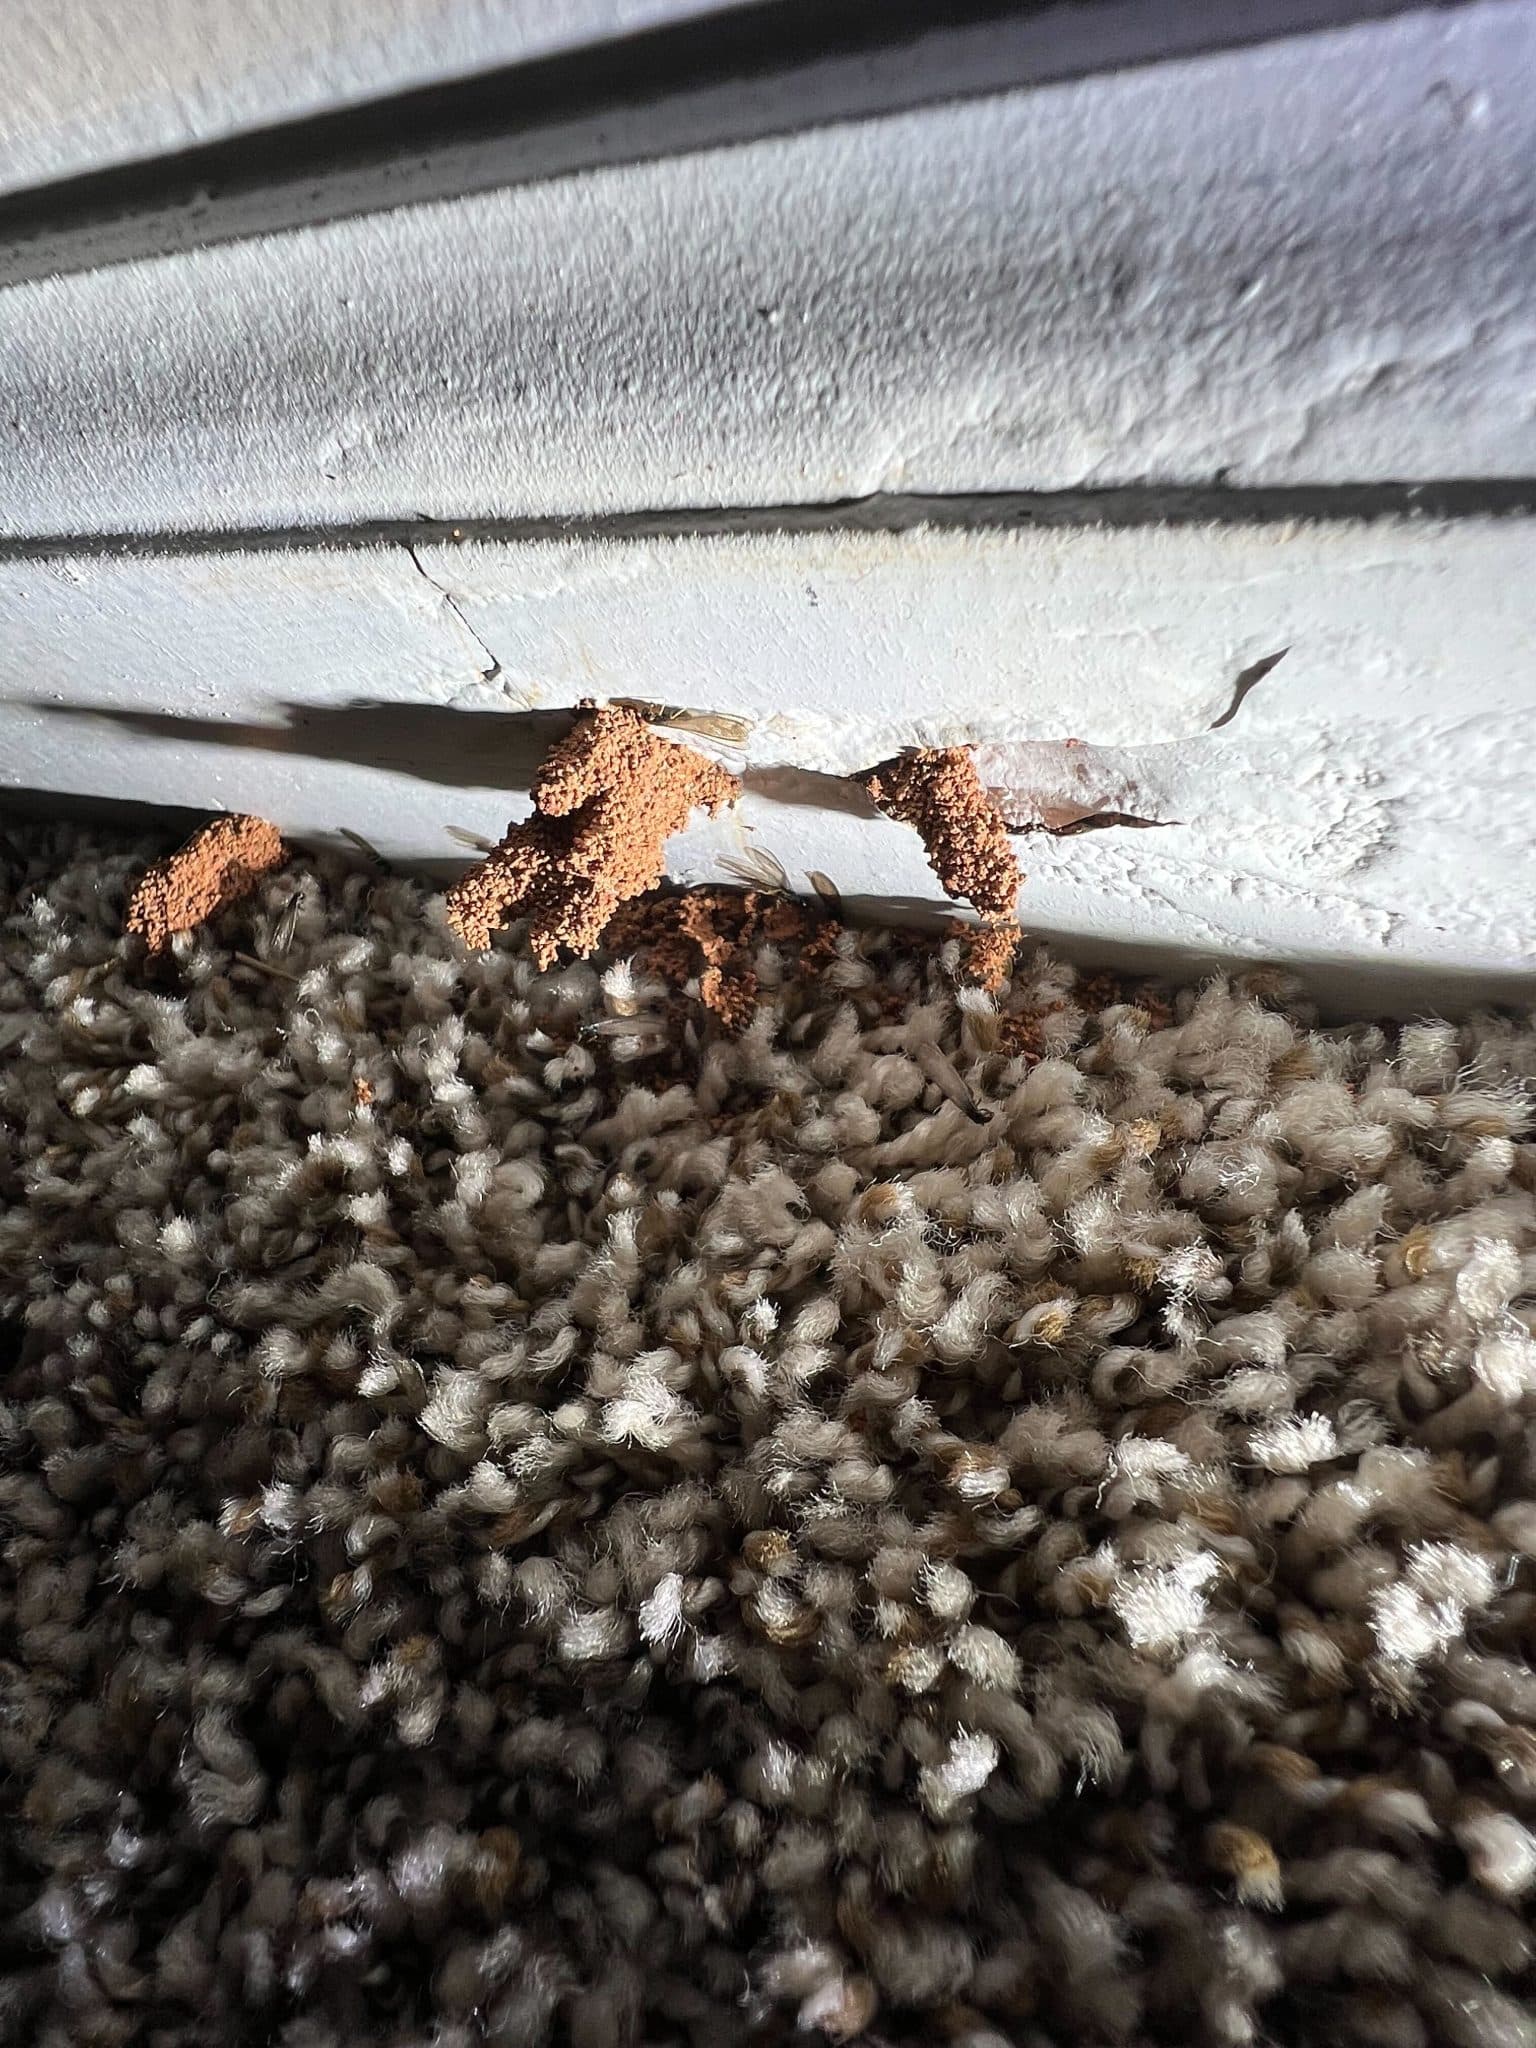 Termite tubes coming out of wall